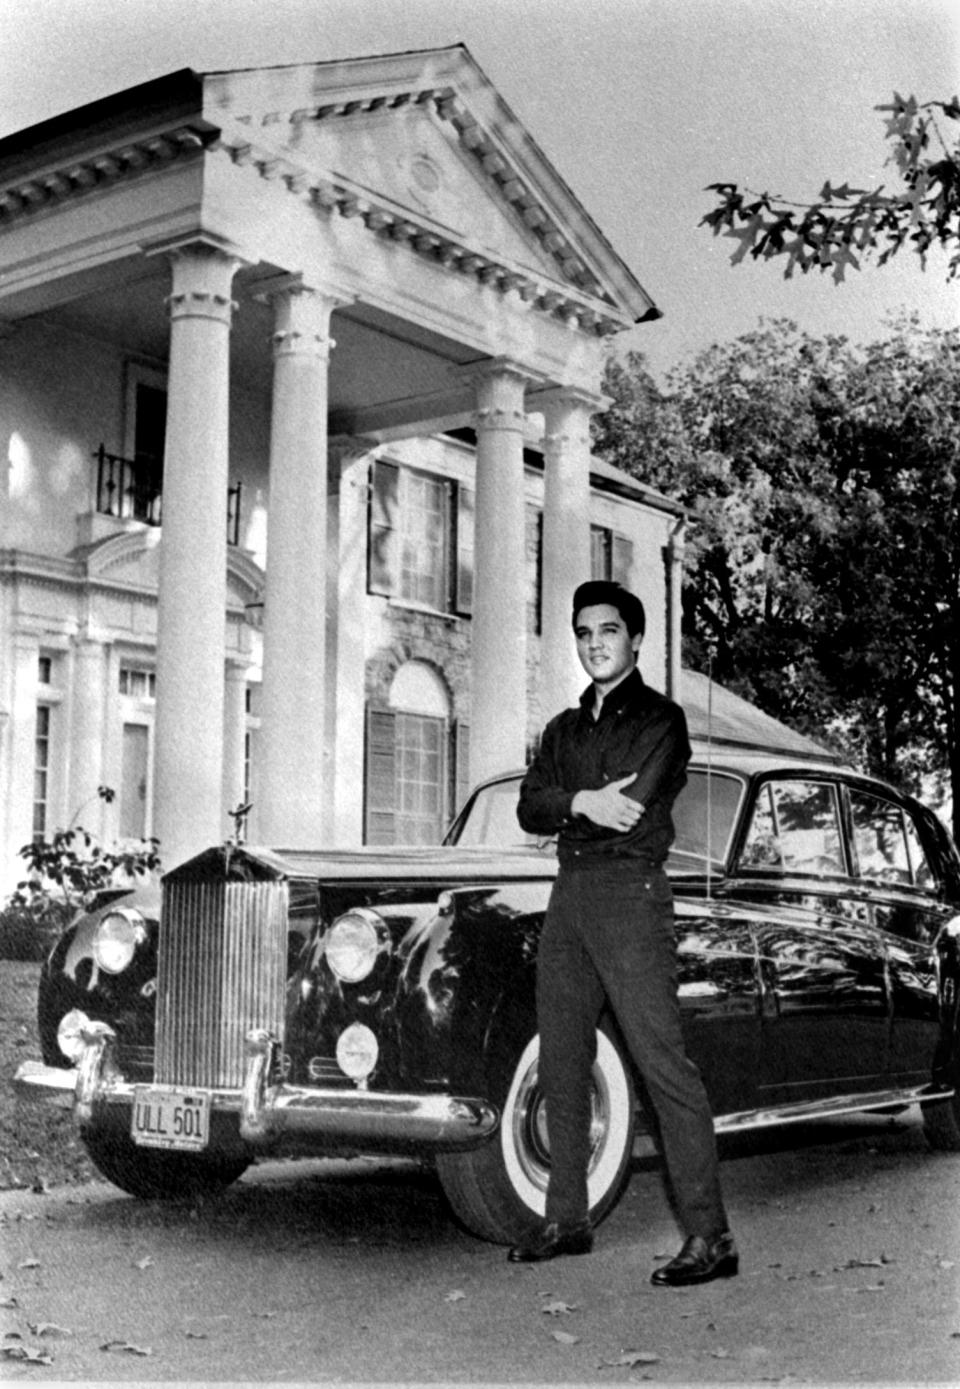 Elvis Presley poses in front of his Graceland home with his new Rolls Royce in October 1960.